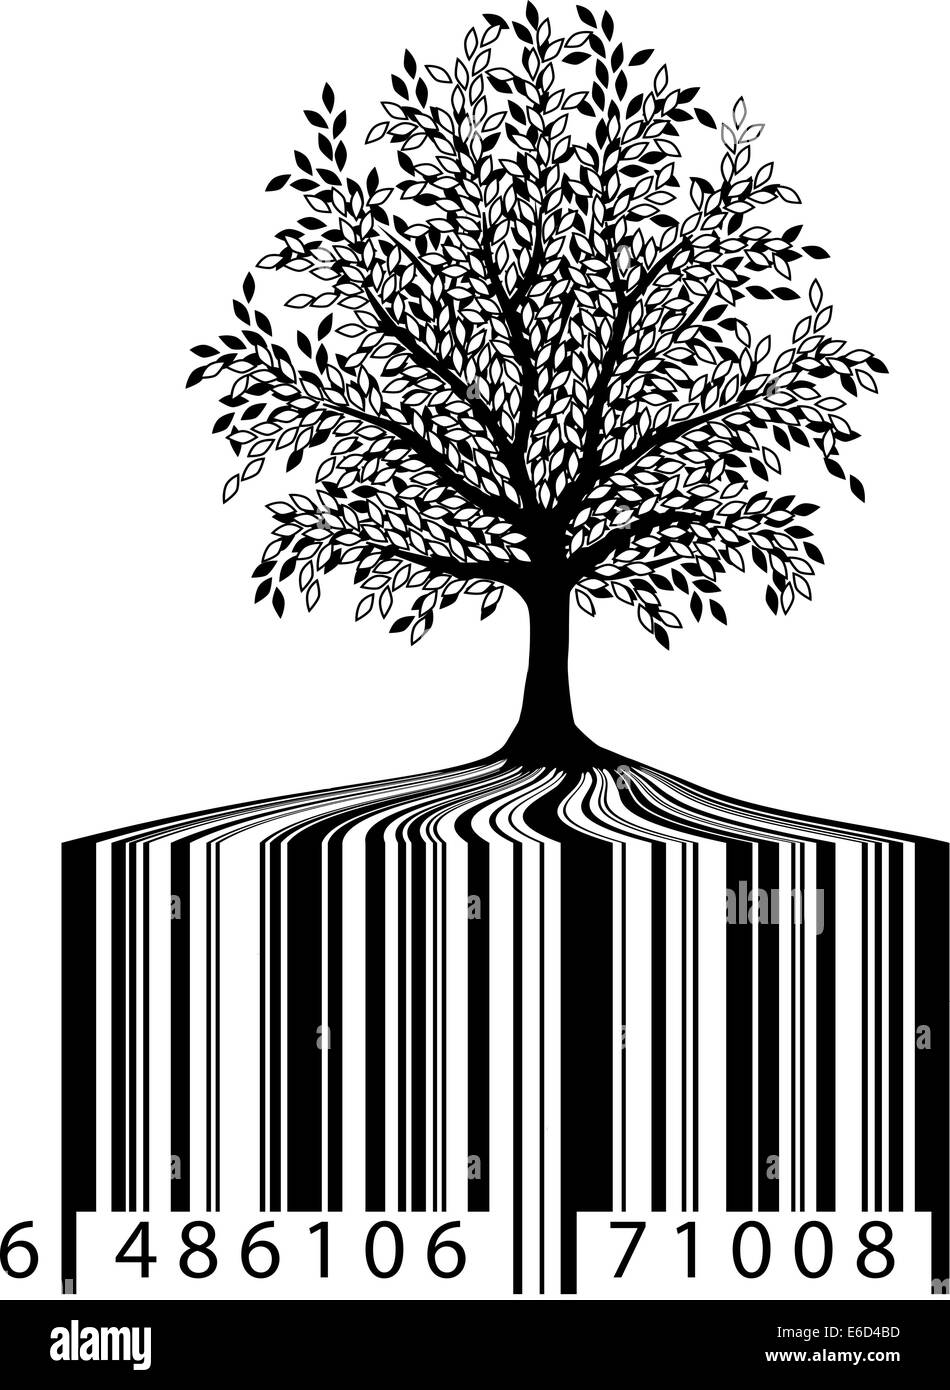 Editable vector illustration of a tree with bar-code roots Stock Vector